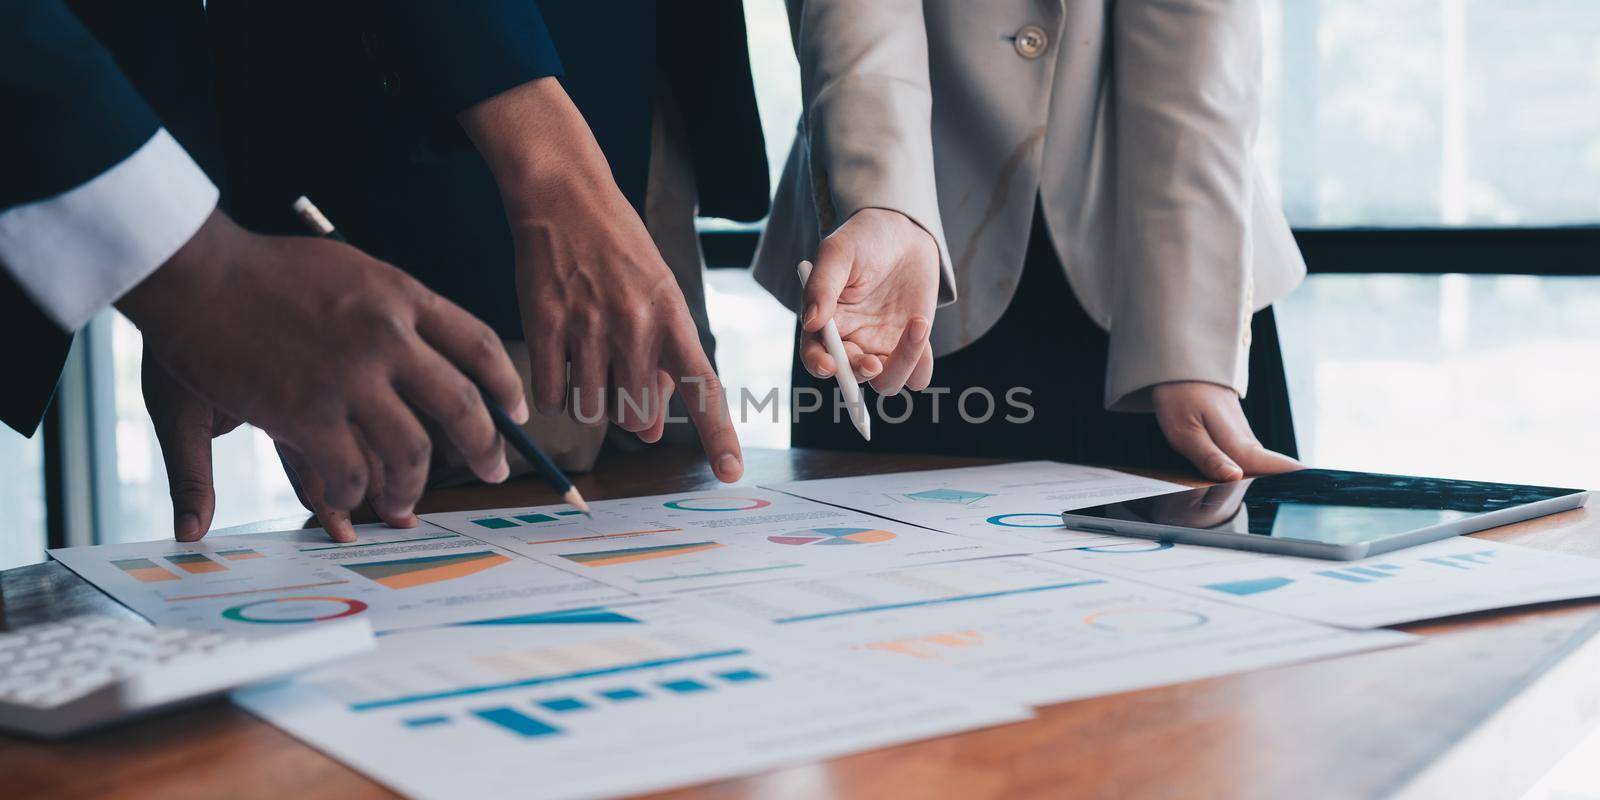 business adviser meeting to analyze and discuss the situation on the financial report in the meeting room.Investment Consultant, Financial advisor and accounting concept.